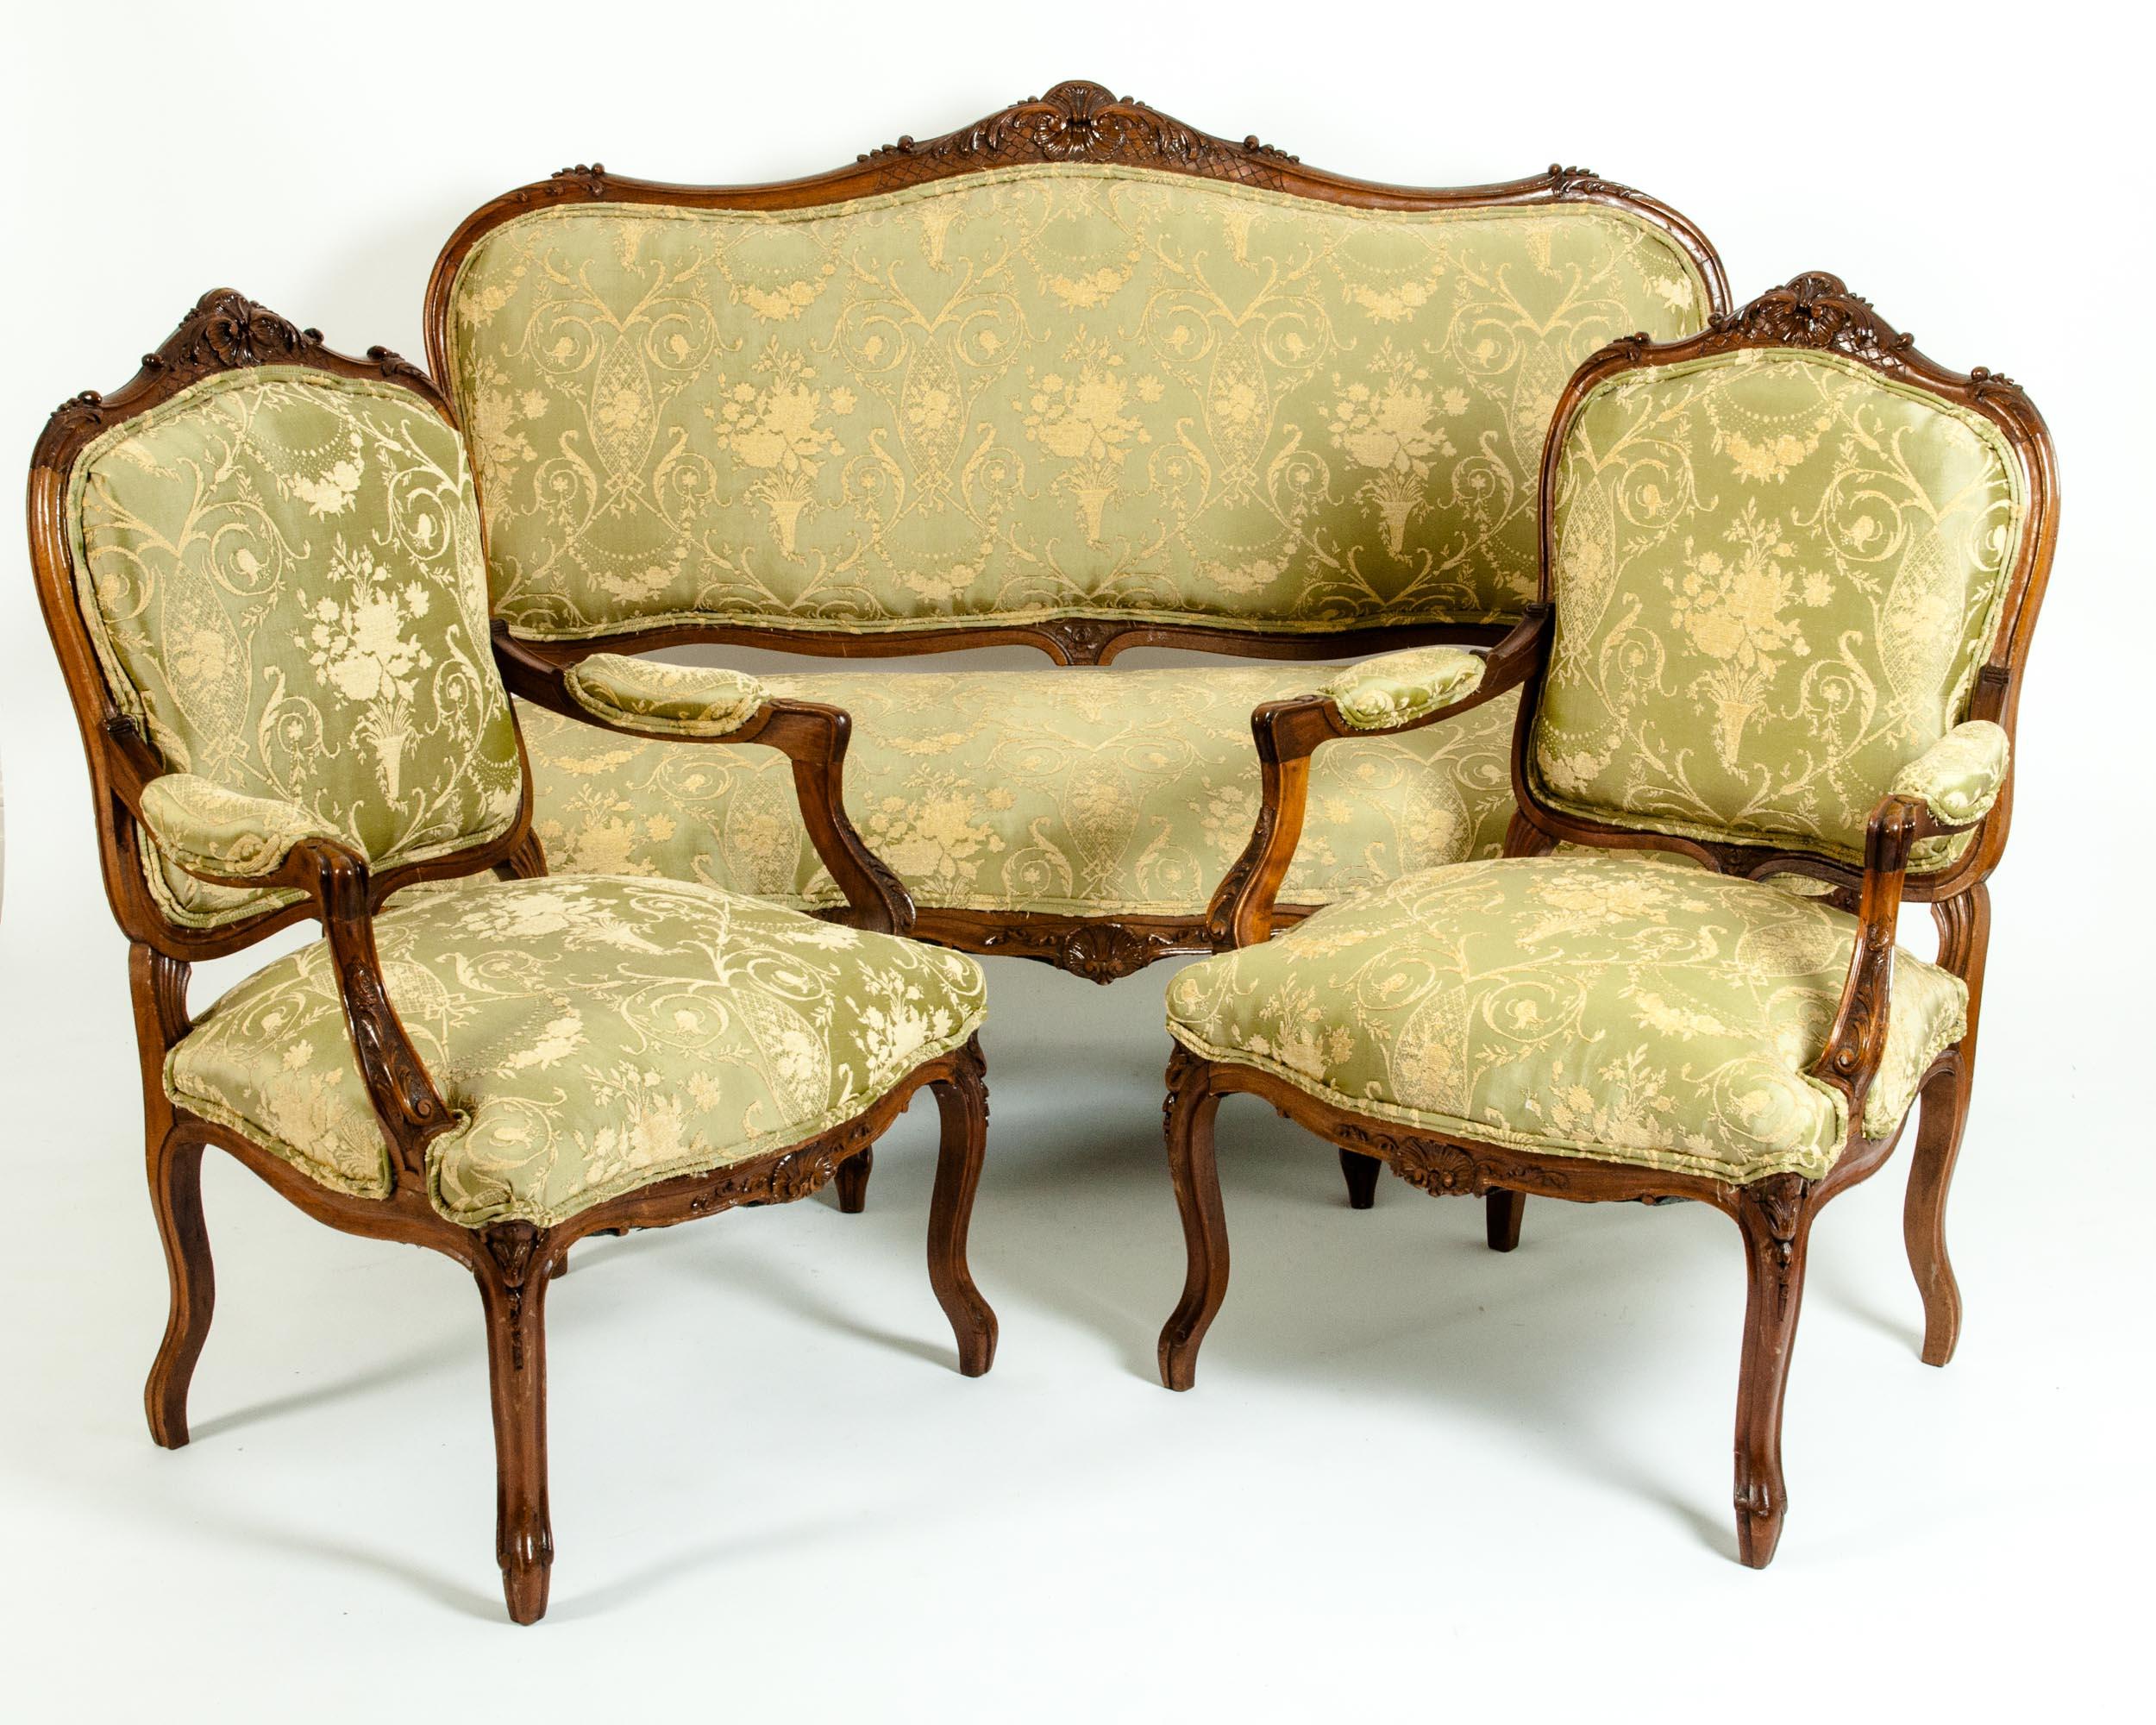 Very fine mid-19th century mahogany wood frame three-piece salon suite. The set include one settee and two armchairs. Each piece is very sturdy and in good antique condition with age / use appropriate wear. The upholstery is very immaculate. Each